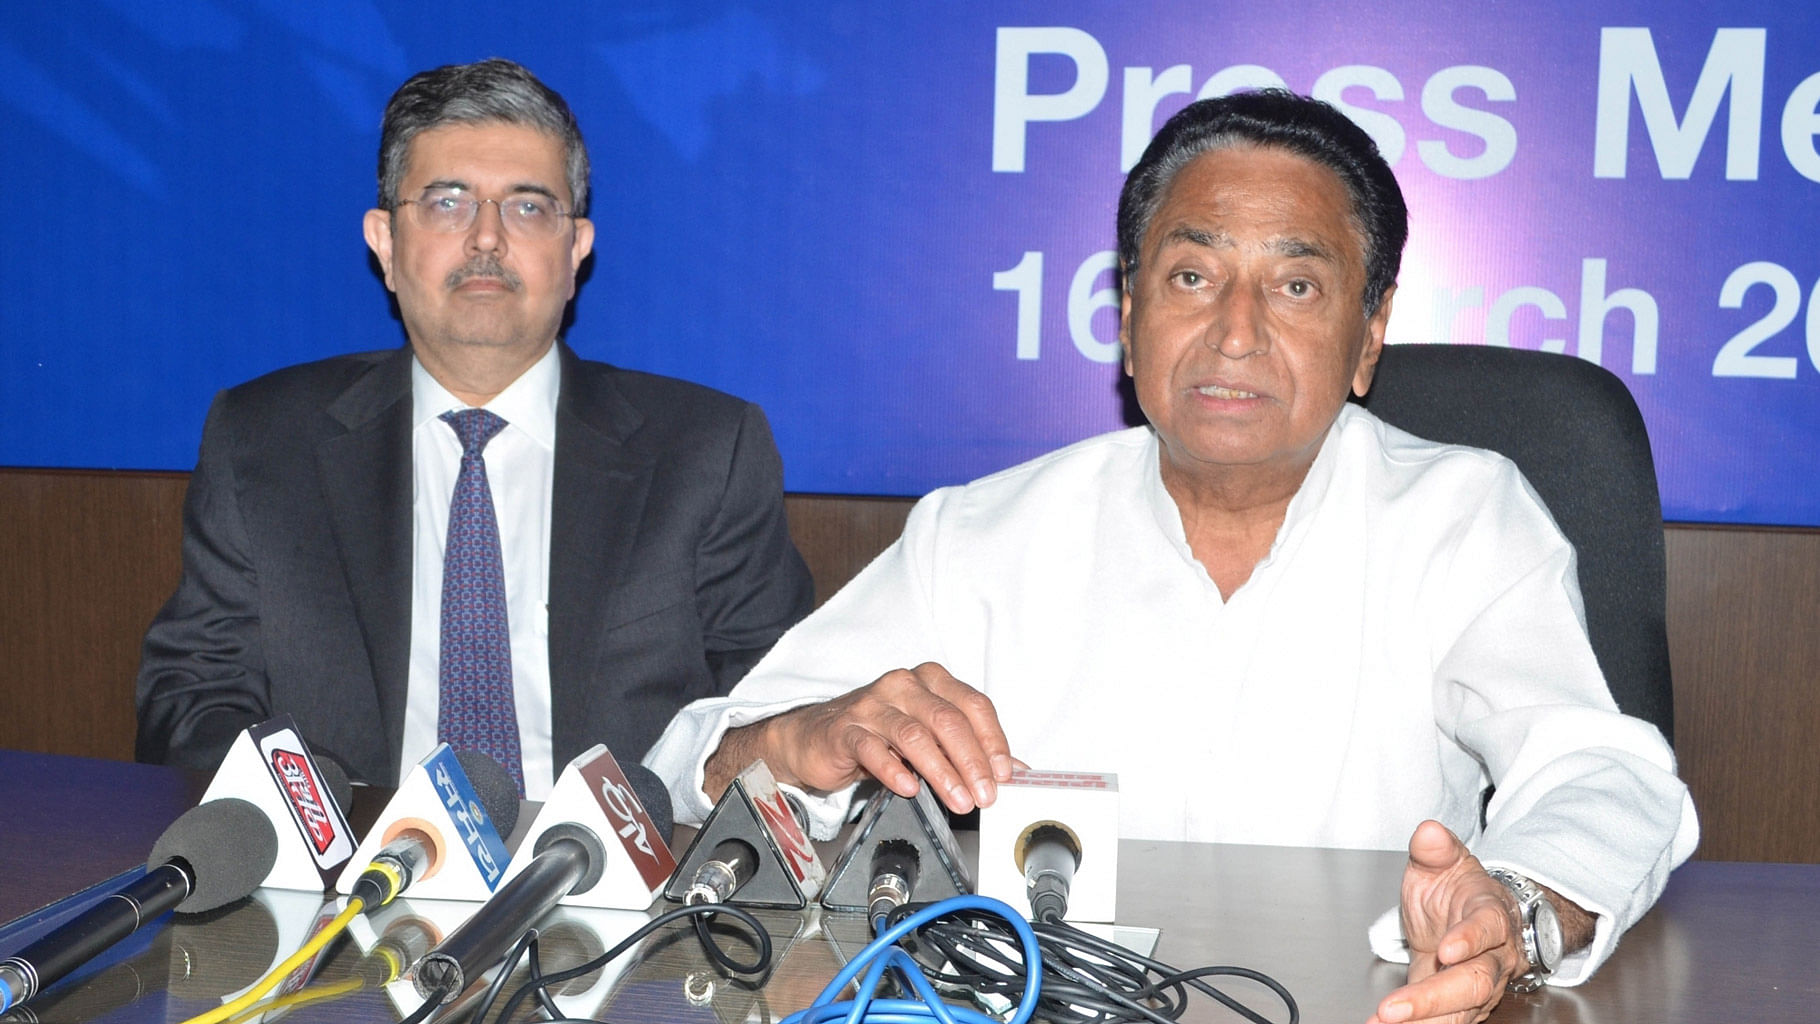 

Congress leader Kamal Nath addressing the press at the convocation of a private college in Ghaziabad on March 16, 2016. (Photo: IANS)